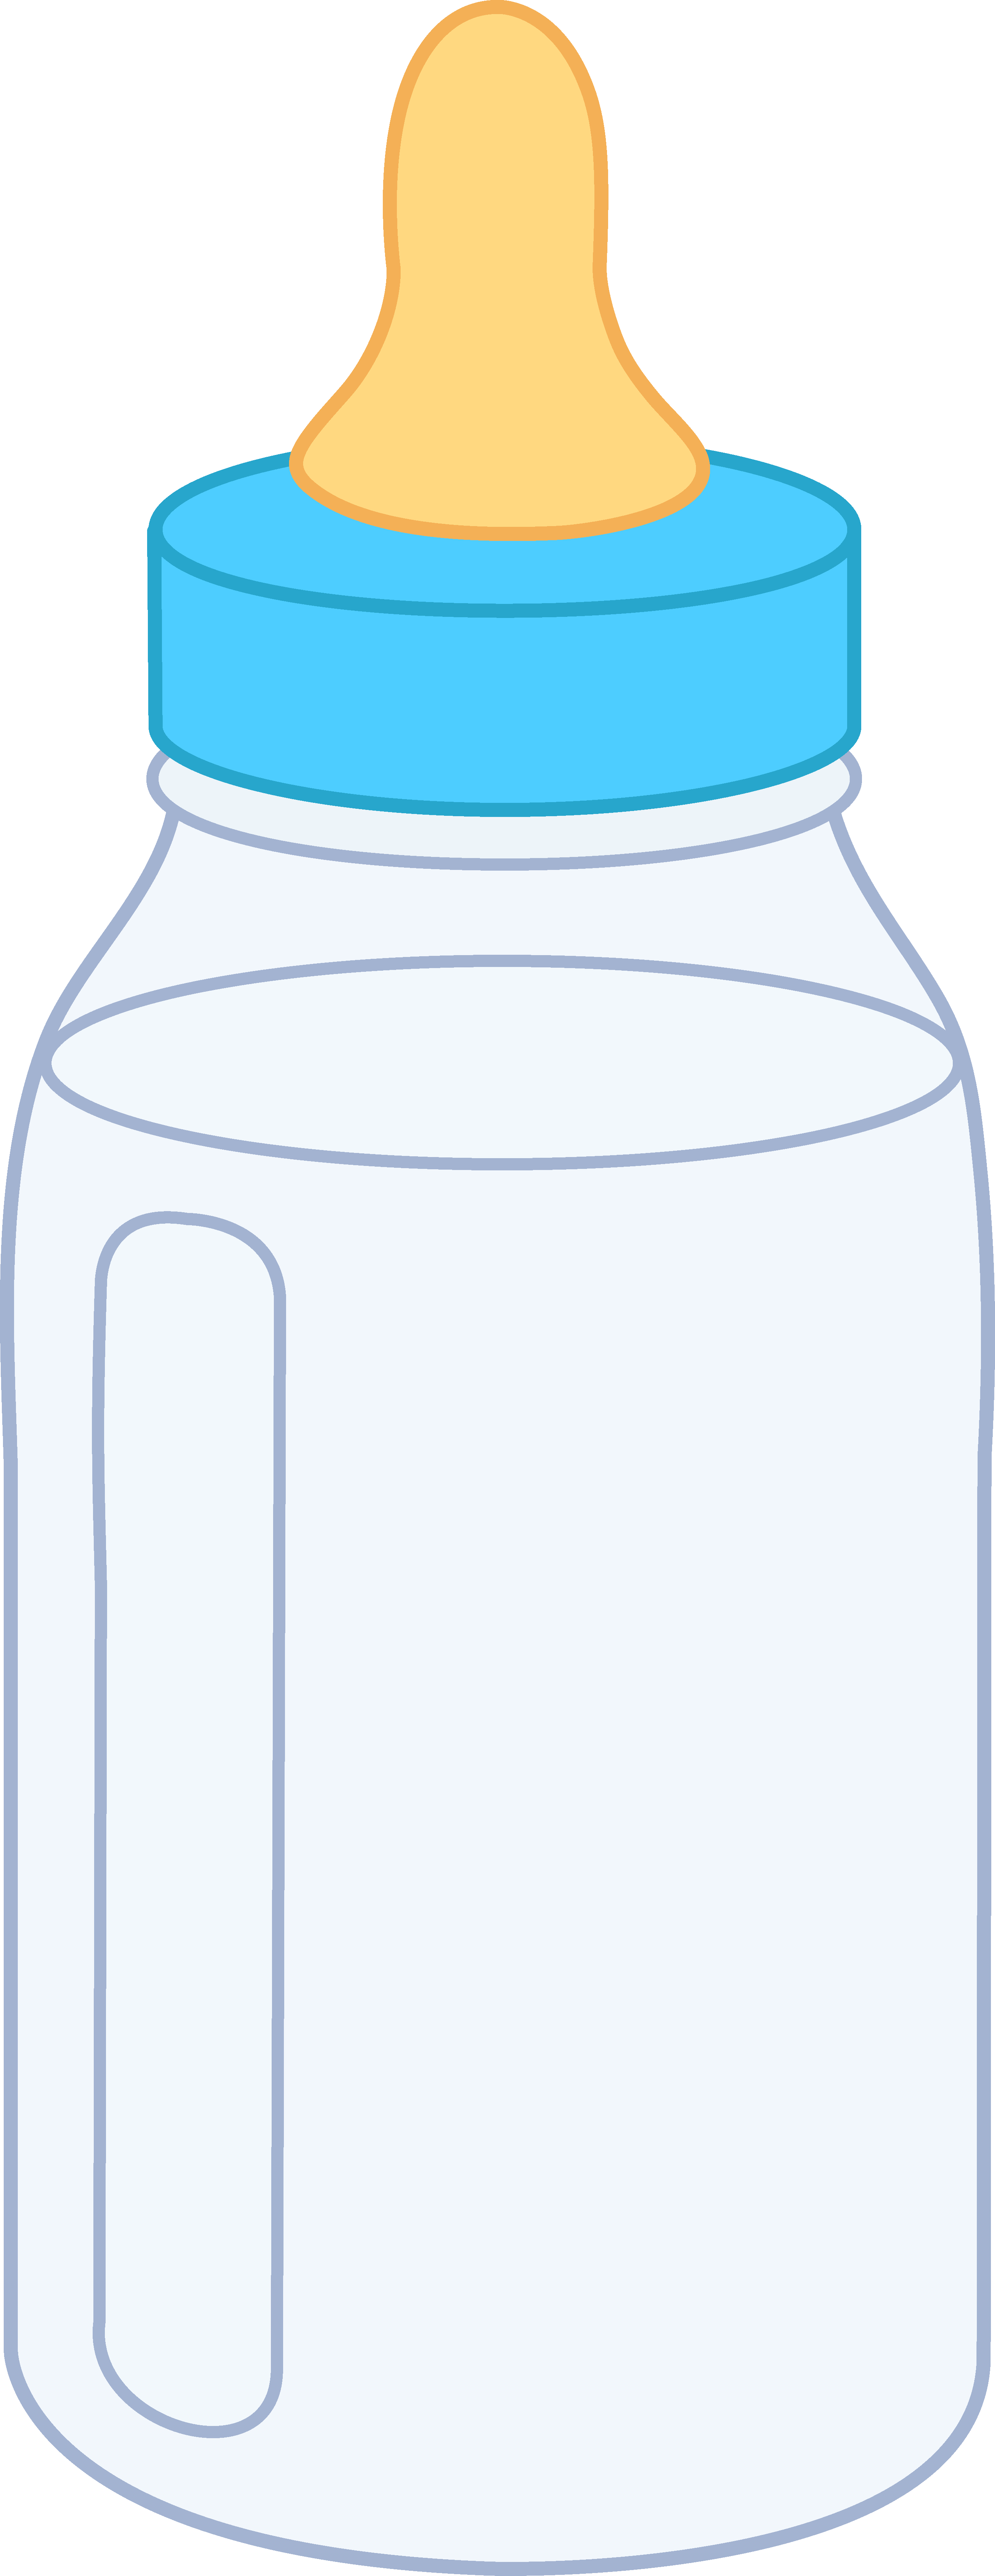 Blue Baby Bottle Clipart - Baby Bottle Graphic Transparent Background (2685x6953)